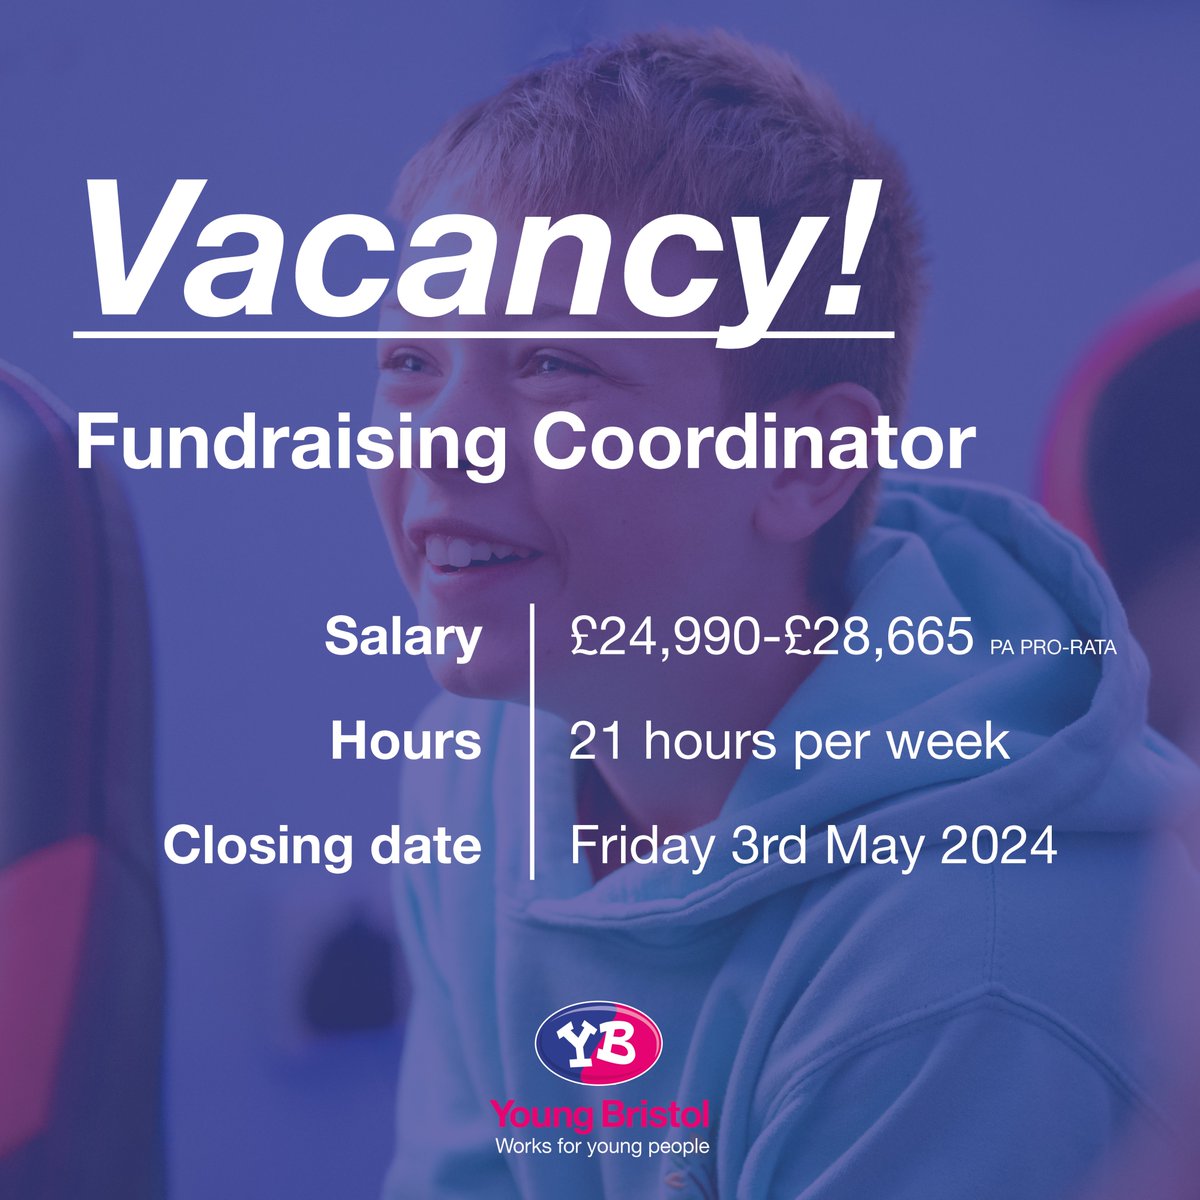 VACANCIES: Join our Fundraising Team! 📣✨ We are recruiting for 2 roles for Young Bristol’s growing fundraising team! 🎉 Closing Date: Friday 3rd May 2024, midnight🕛 Click below to find out more and apply!⬇️ youngbristol.com/join-our-team #fundraising #hiring